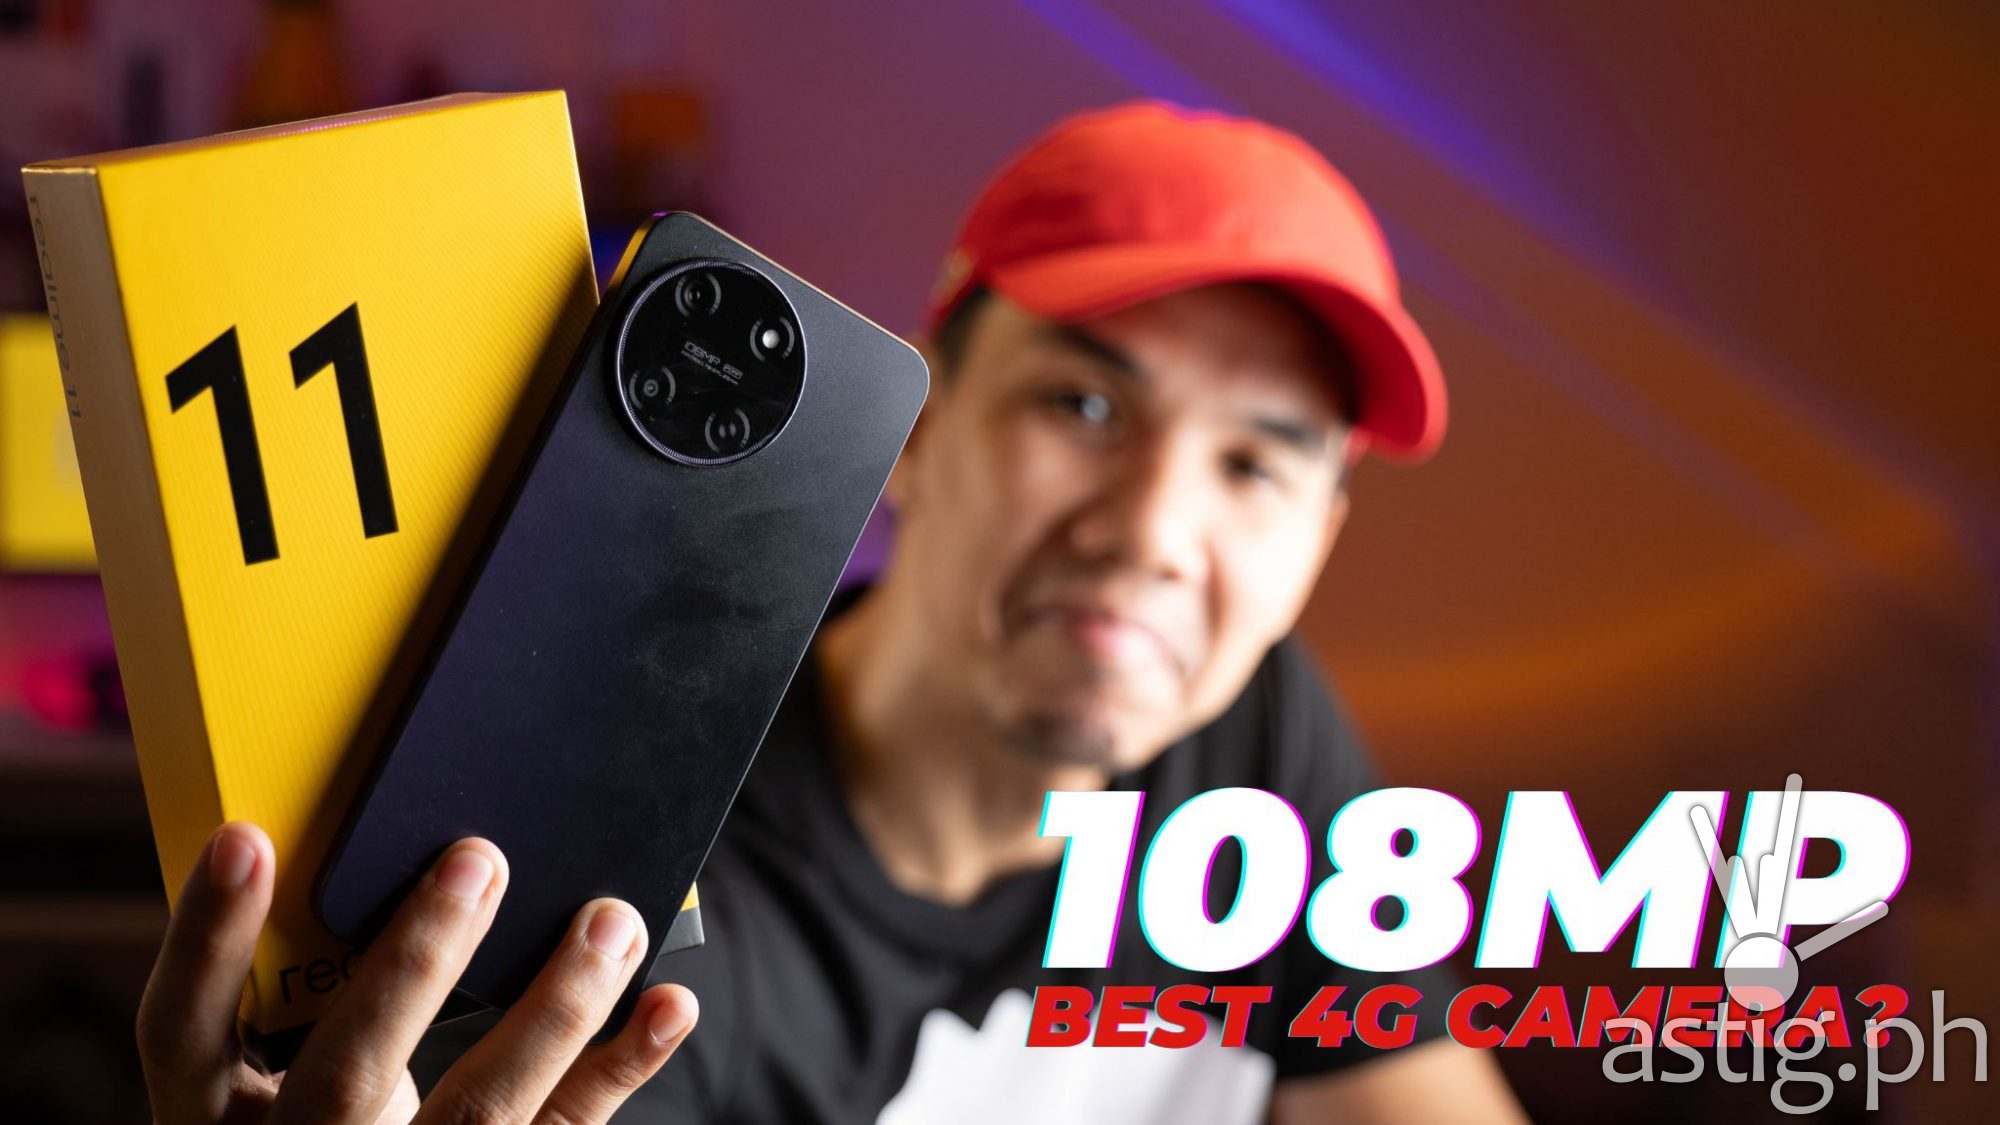 realme 11 review: Best 4G camera phone of 2023?